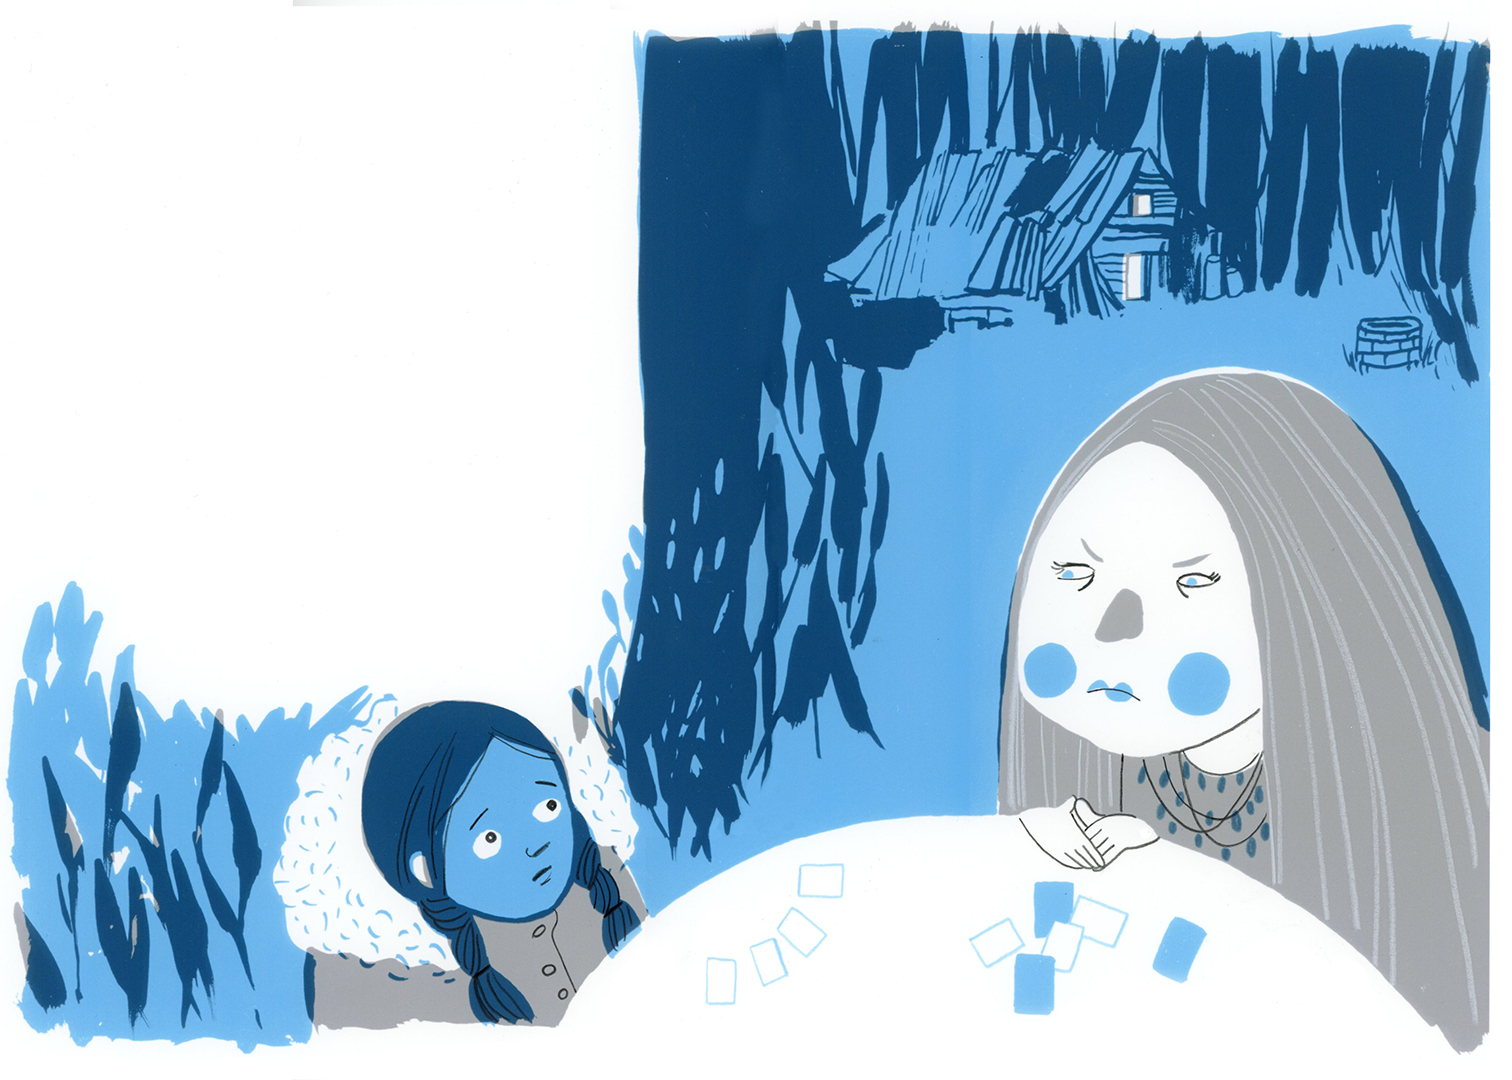 "Ellie and the Witch." A double page spread from the book, "Talking To Nits".